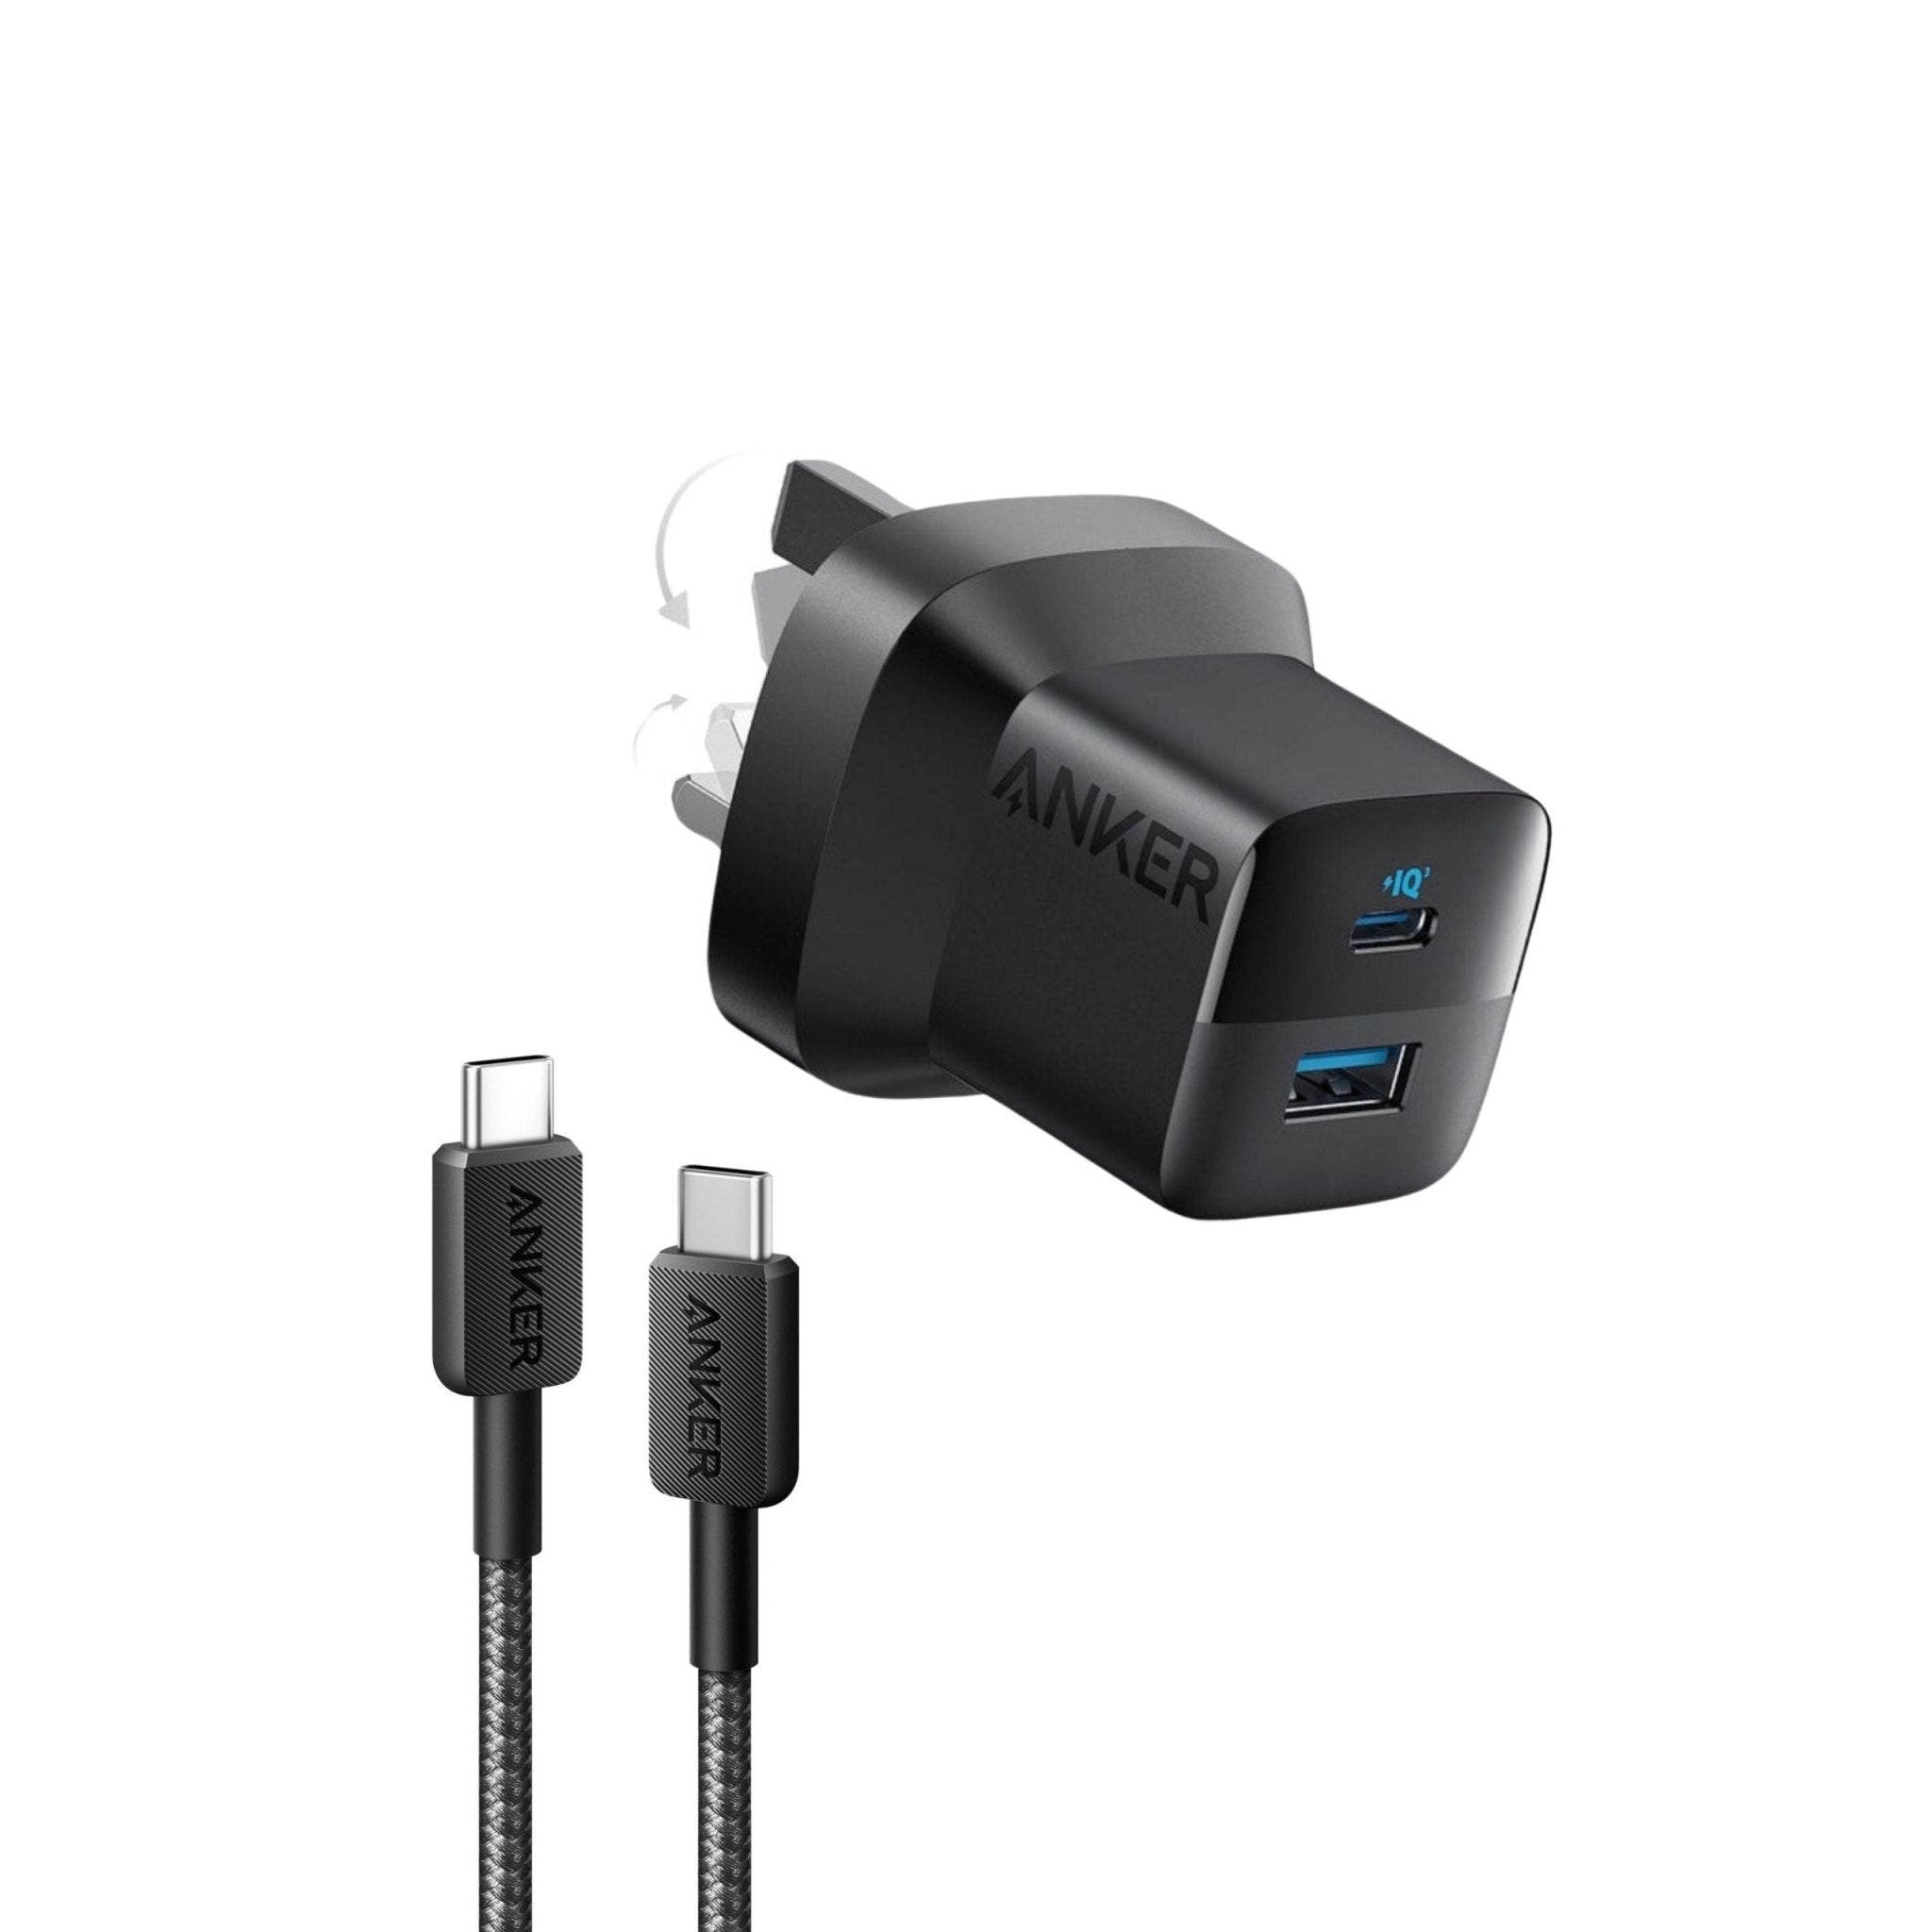 Anker 323 Charger with 33W USB C to USB C Cable 1m - Black